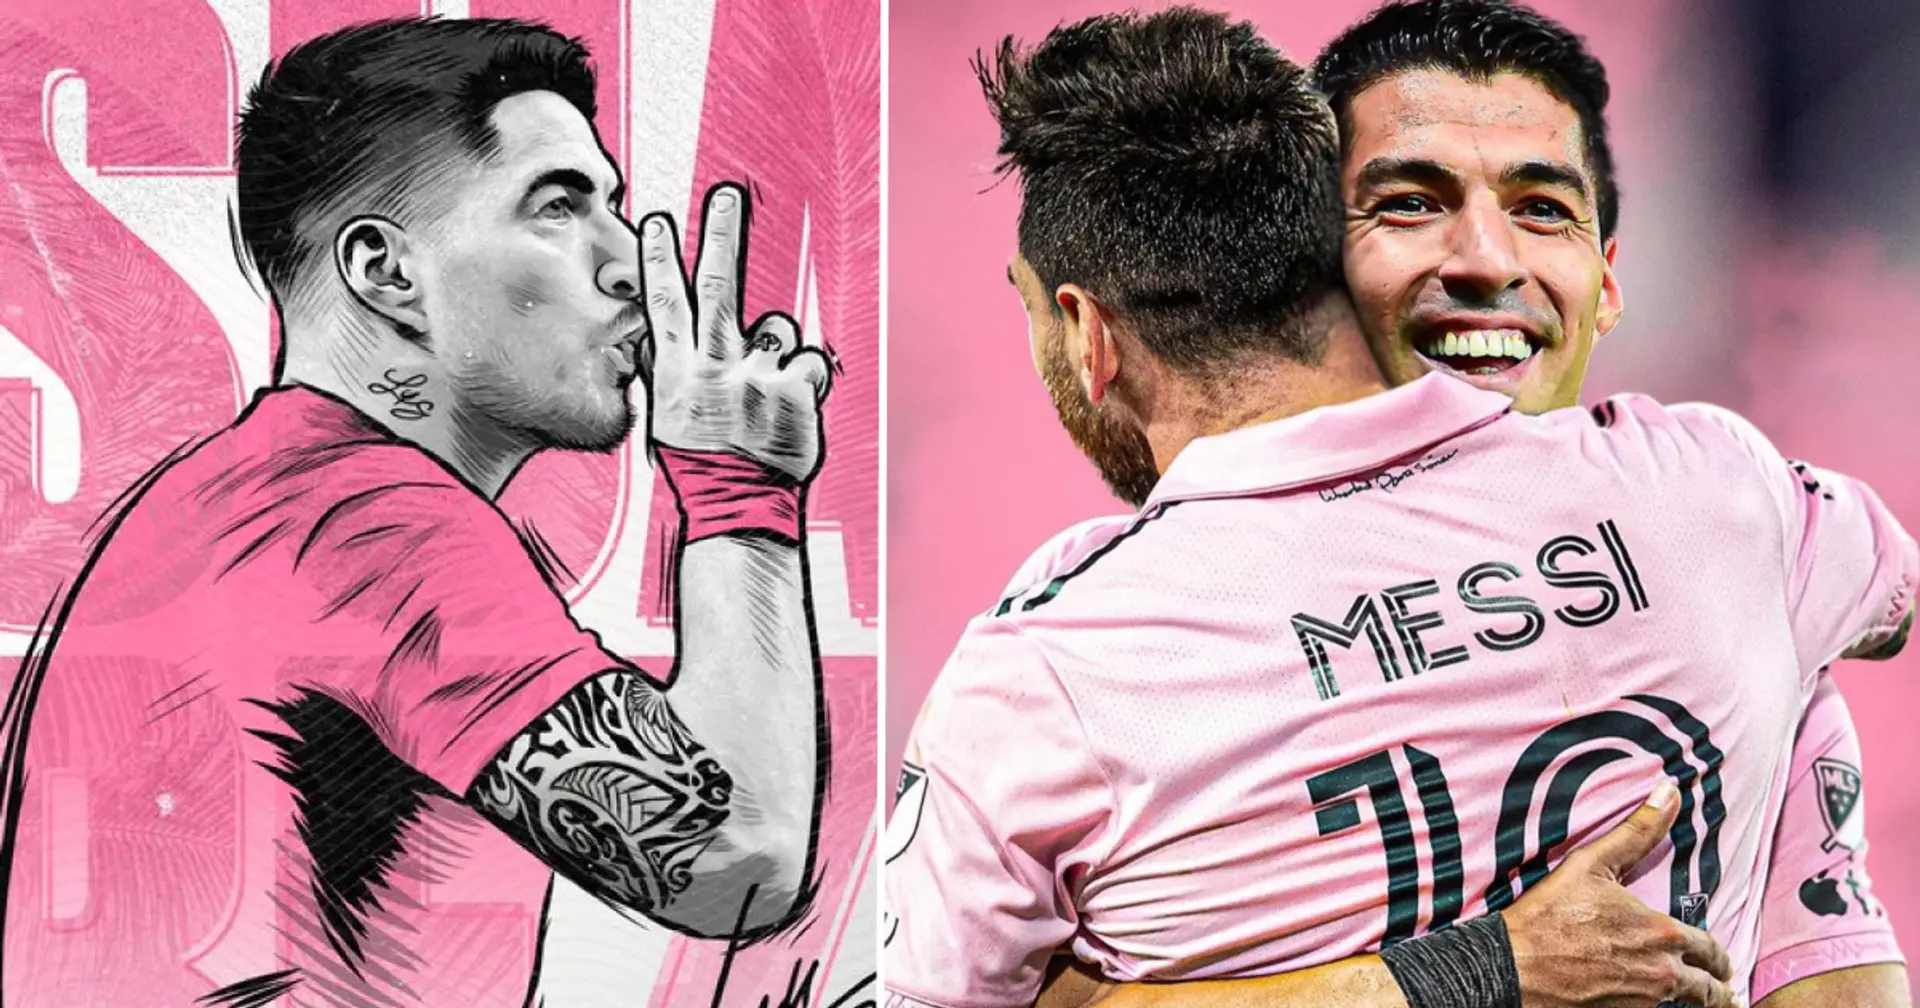 Inter Miami confirm signing Luis Suarez — 4 Barca legends to play together